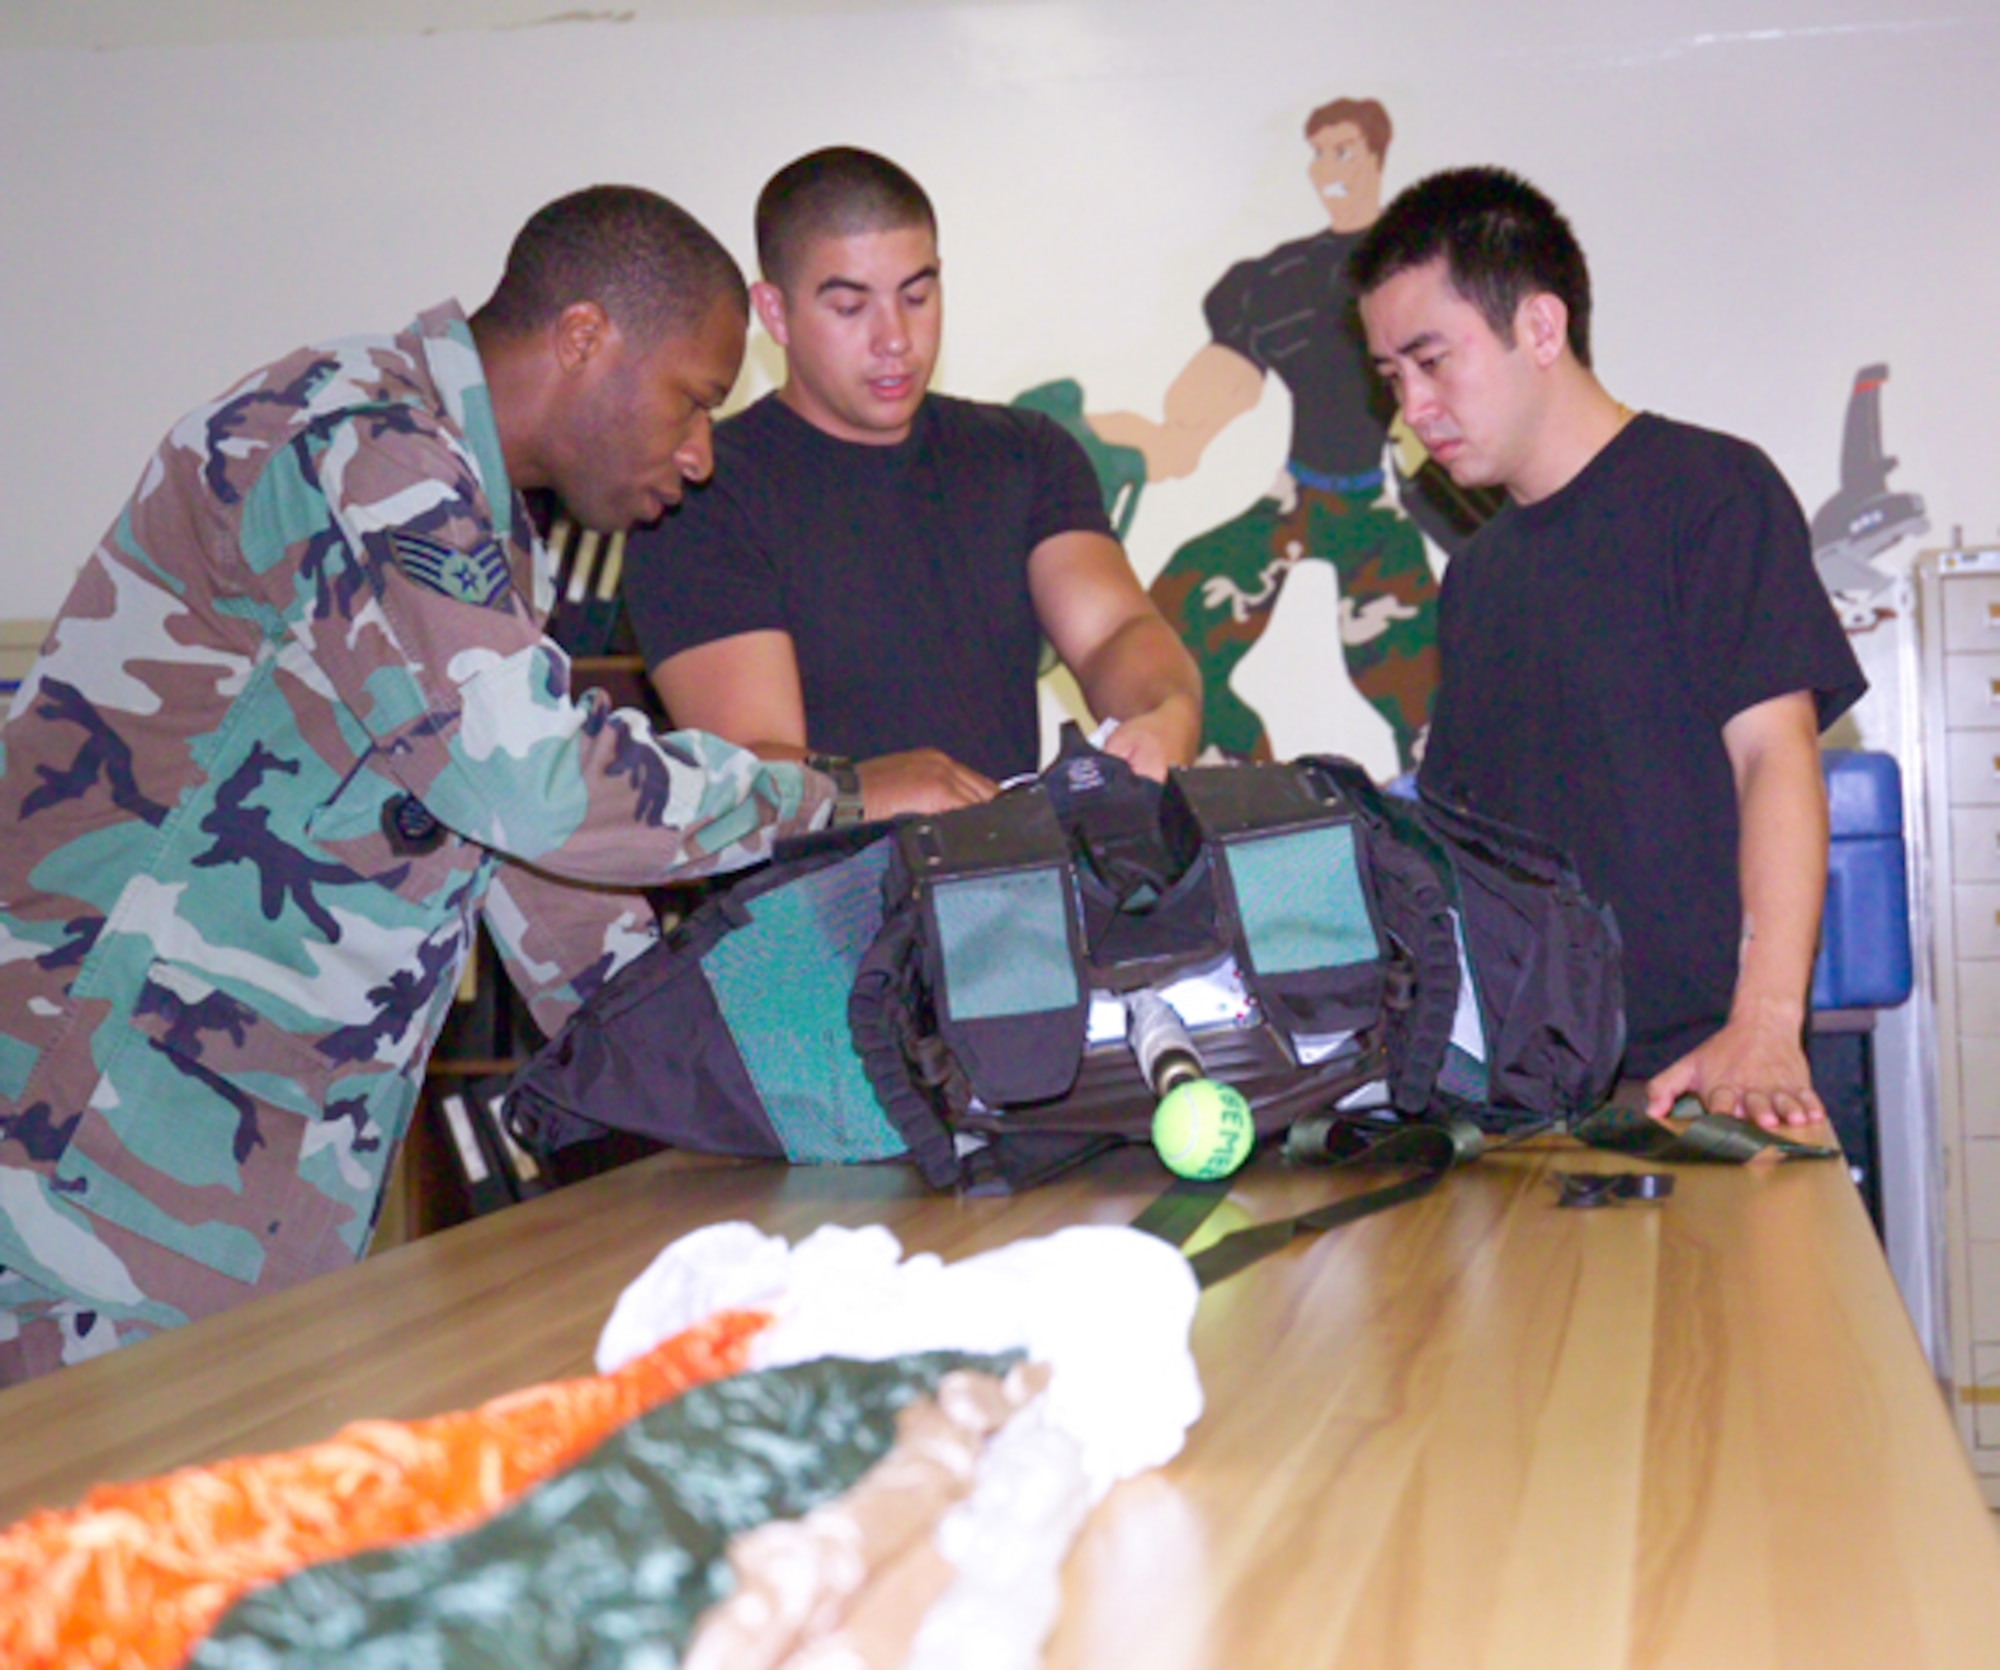 Tech. Sgt. Thomas Canada, Senior Airman Adam Miranda and Staff Sgt. John Pulley go over packing a parachute as part of cross utilization training at the 18th Operations Support Squadron's Aircrew Equipment Flight Kadena Air Base, Japan. Sergeants Canada and Pulley are life support trained, while Airman Miranda is survival equipment trained. 
U.S. Air Force/Scott Hallford